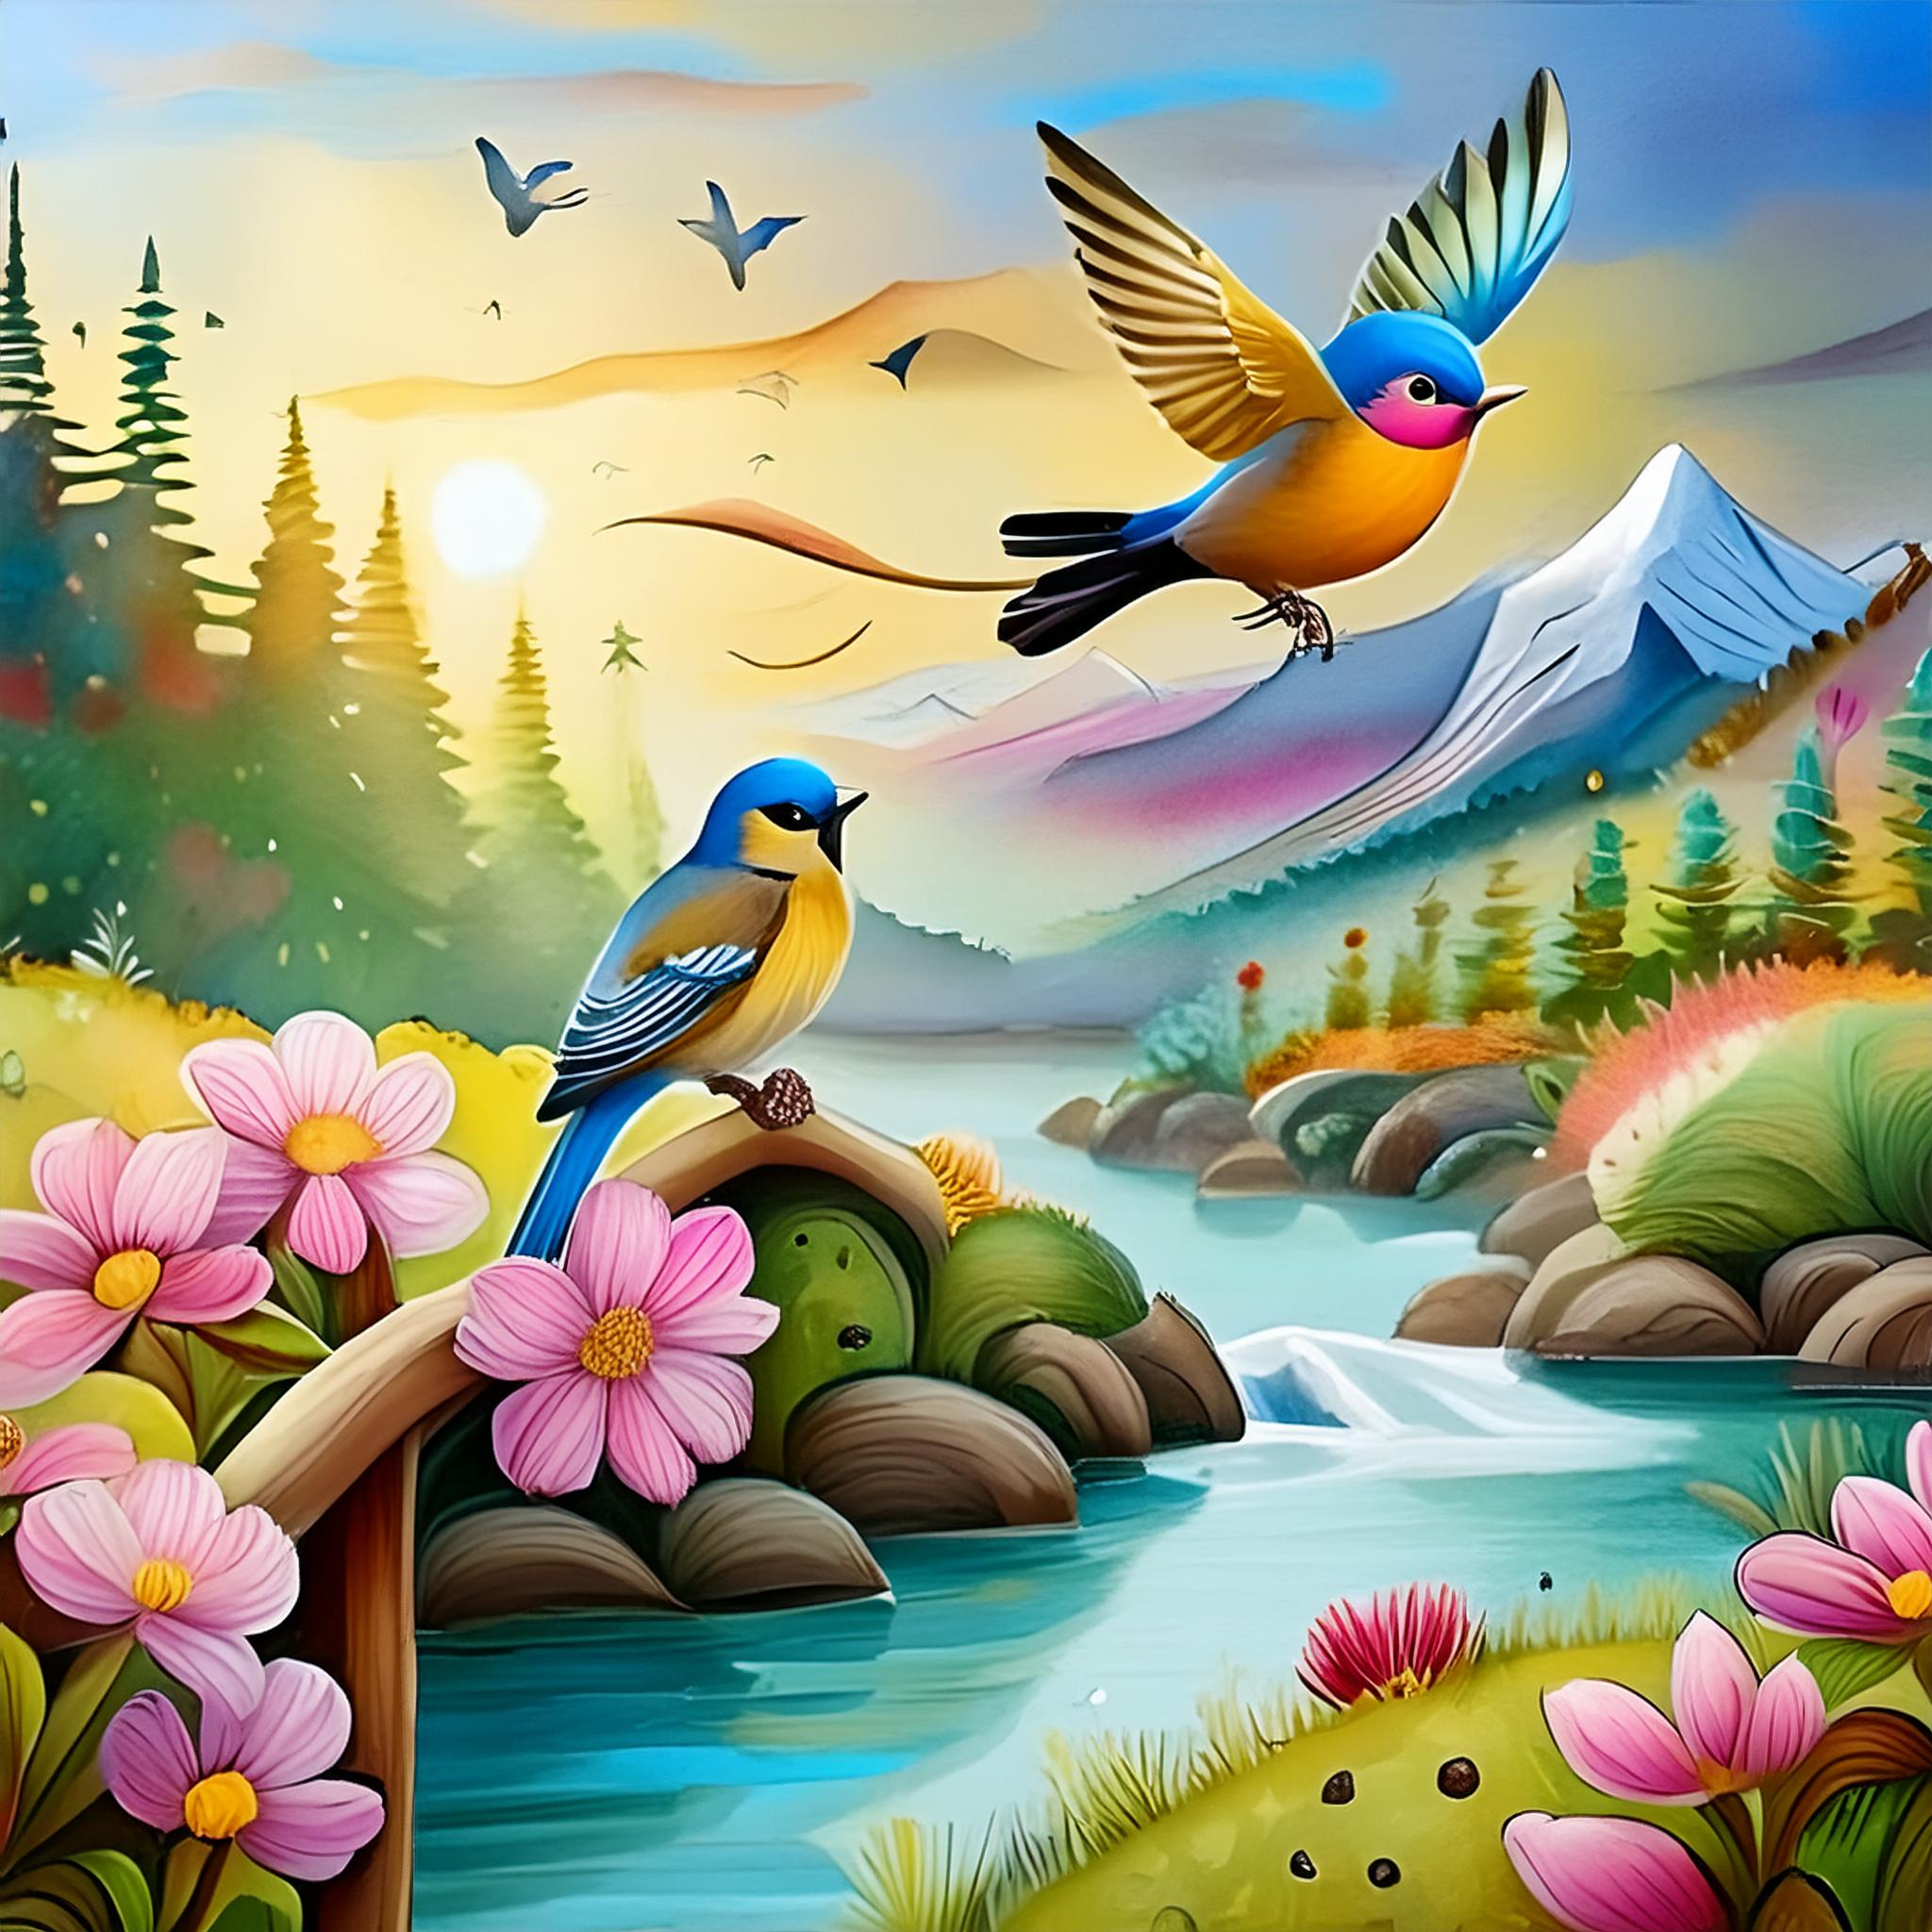 Firefly Beautiful colorful birds fly in the air above the beautiful landscape 73443.jpg